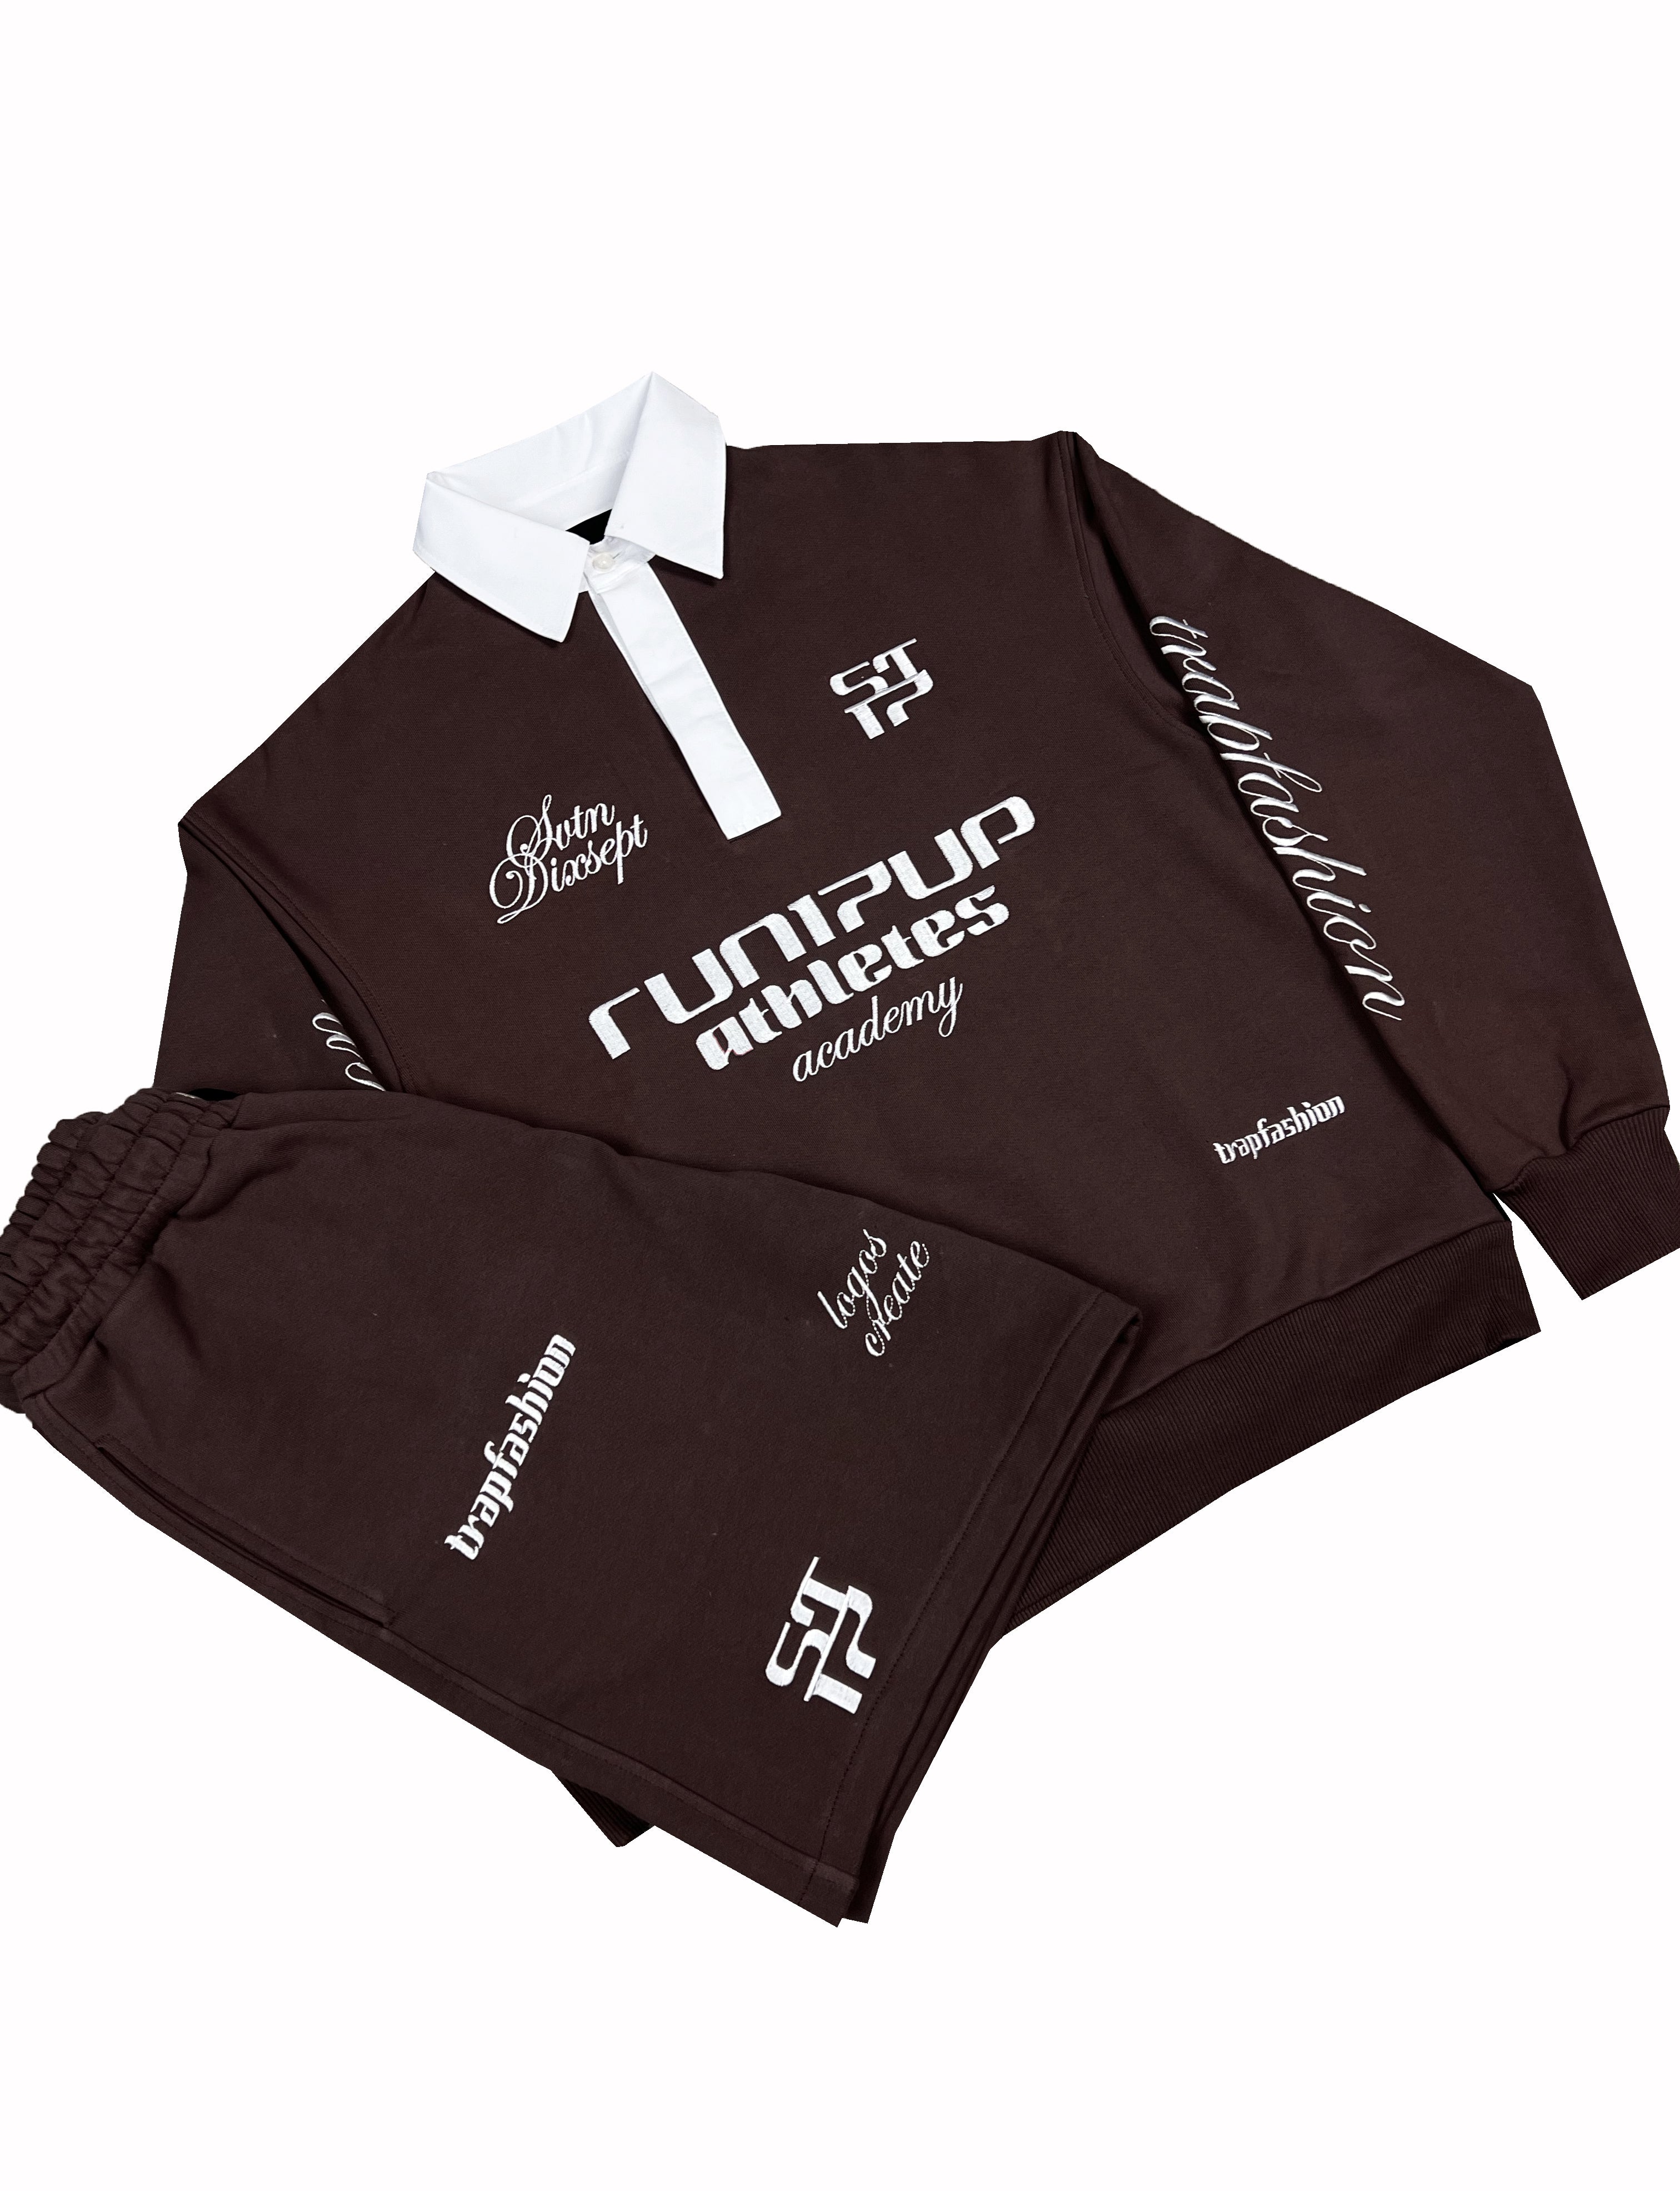 Run17up Athletes Brown Polo Sweater